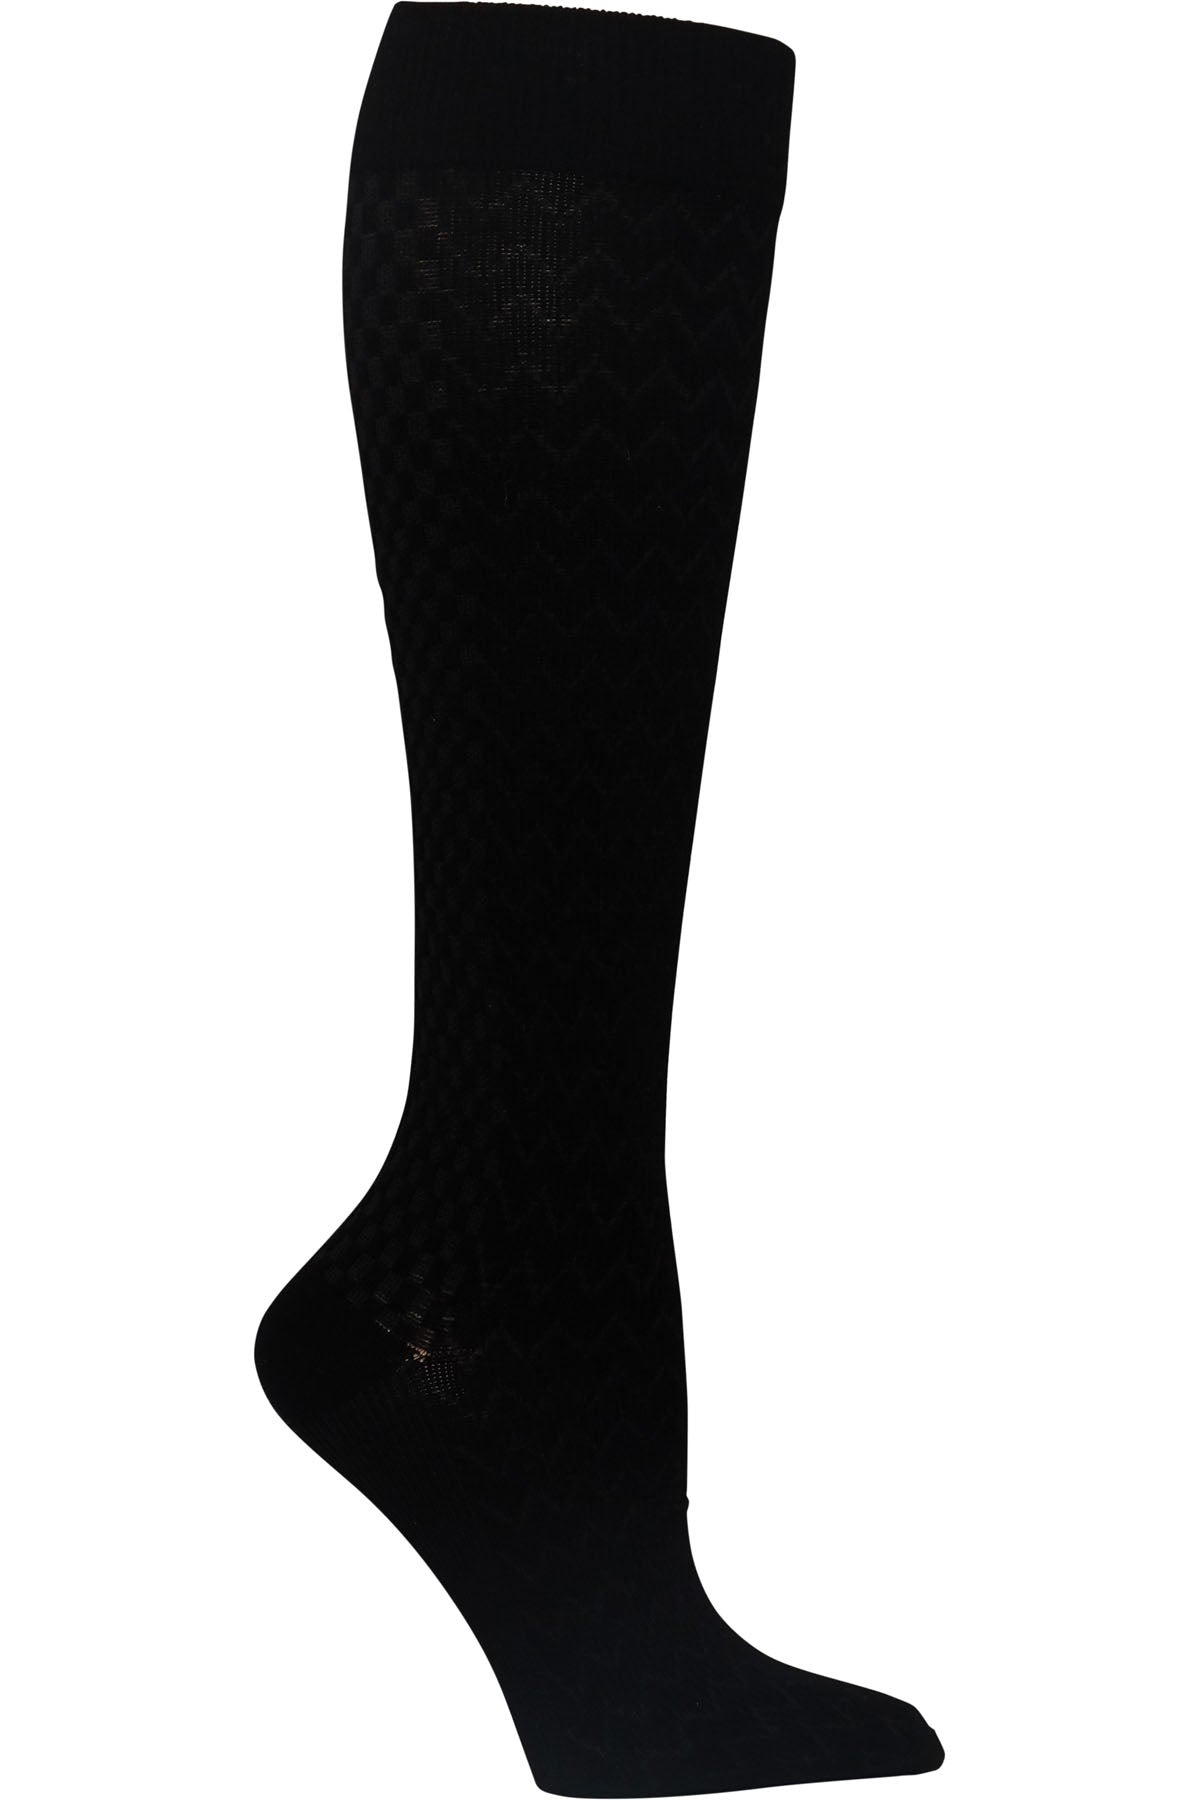 Cherokee Plus Size Mild Compression Wide Calf Socks True Support 10-15 mmHg in Black at Parker's Clothing and Shoes.